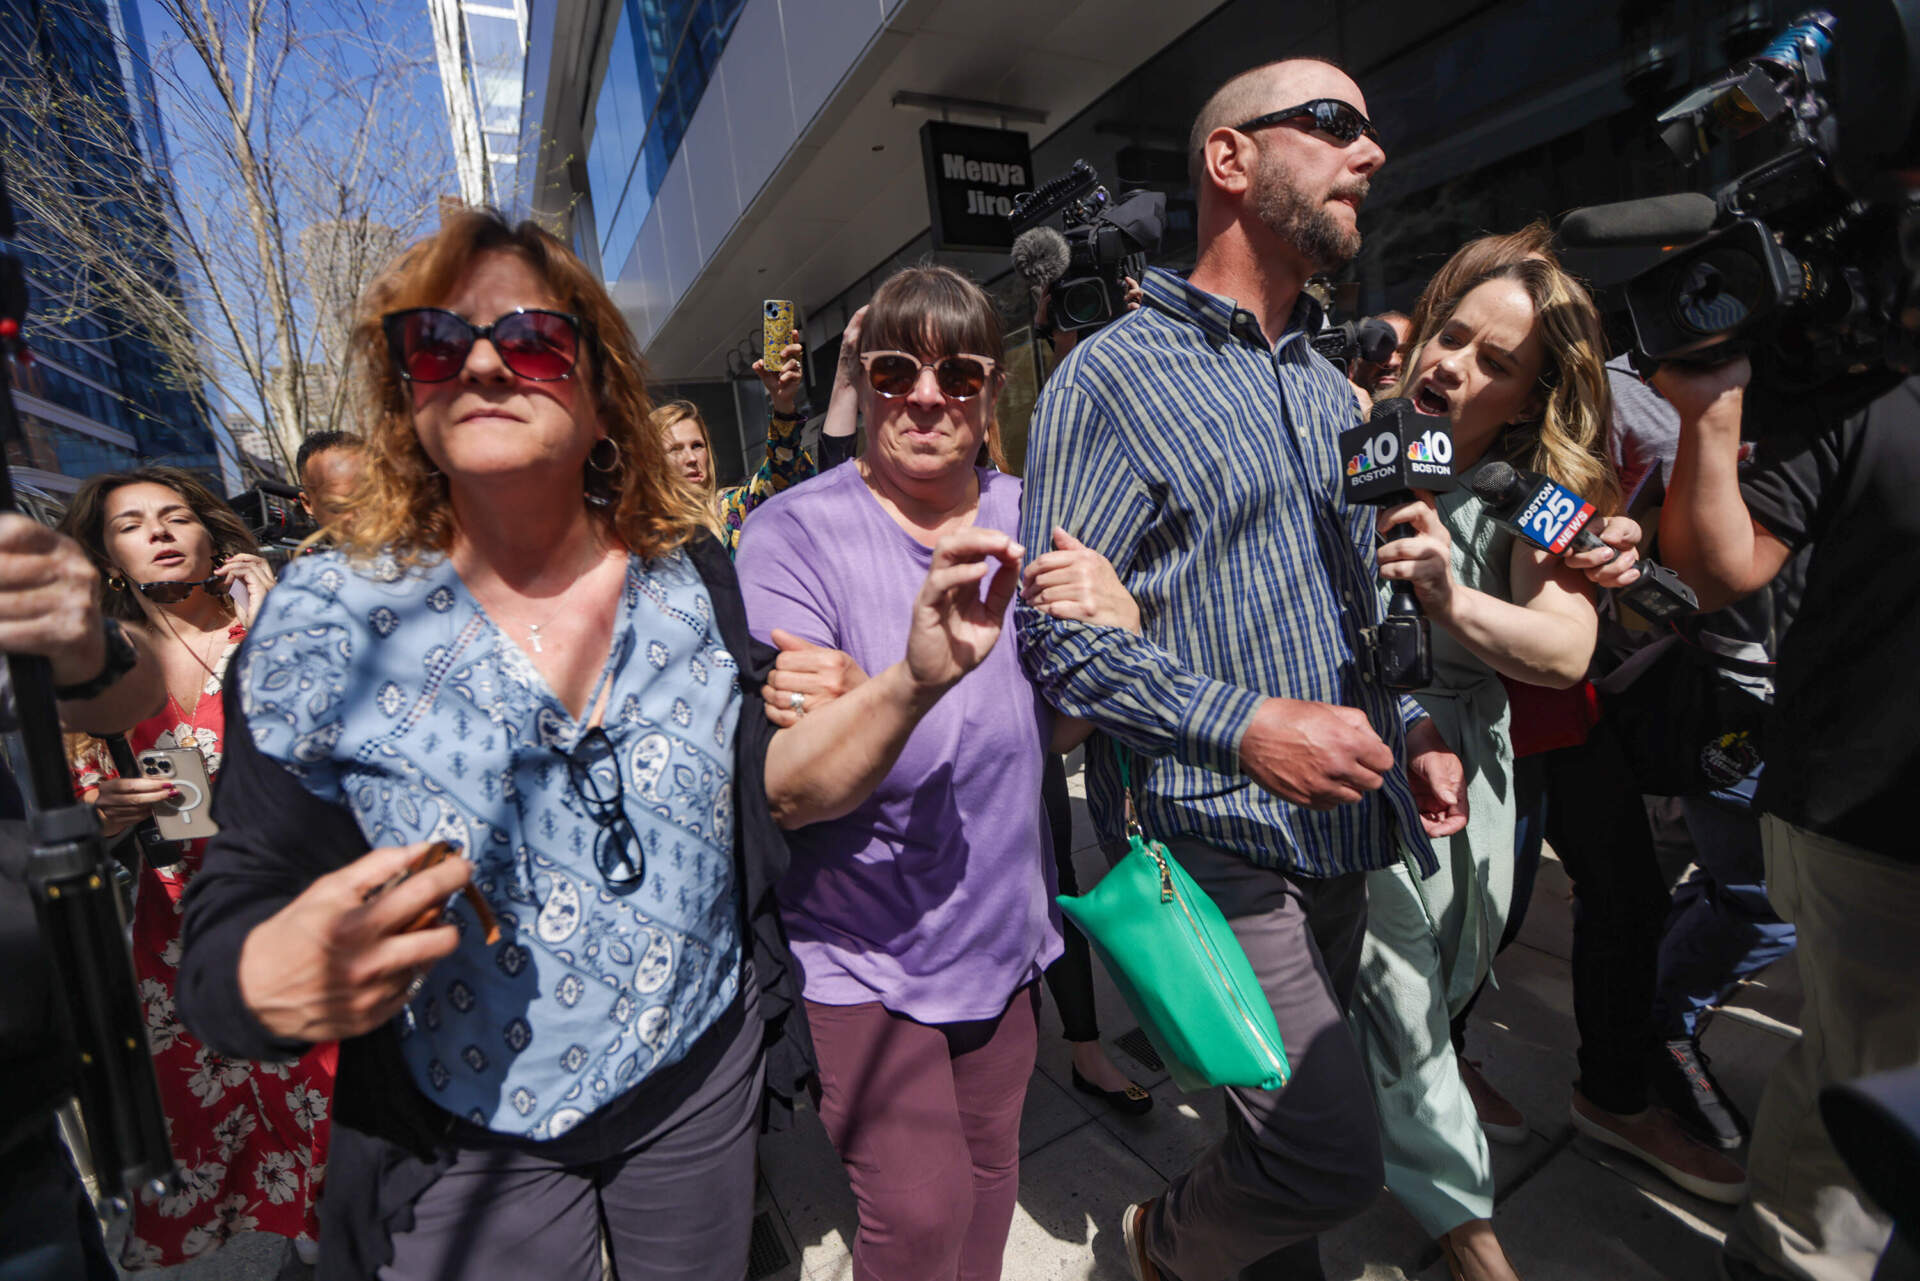 News media surround family members of Jack Teixeira after his arraignment as they leave Moakley Federal Courthouse in Boston. (Jesse Costa/WBUR)